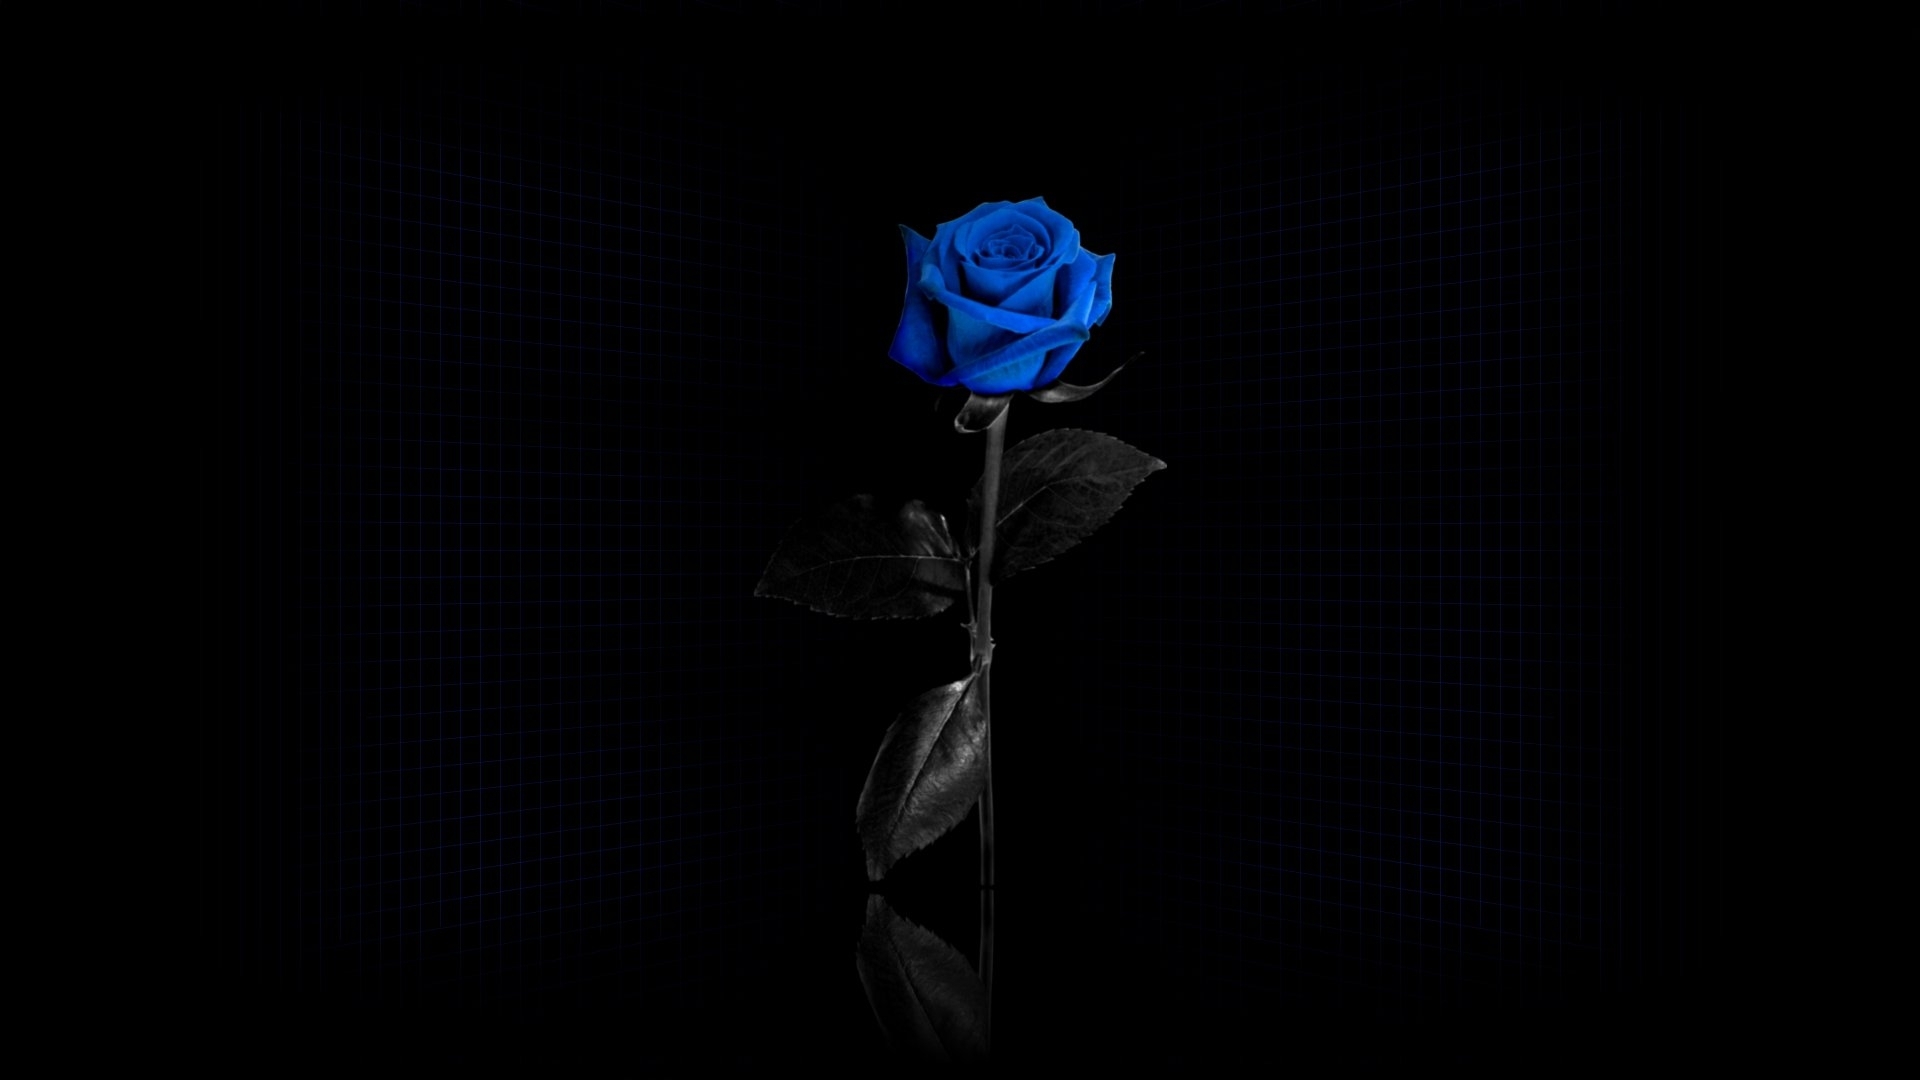 blue rose on black background wallpapers and images   wallpapers